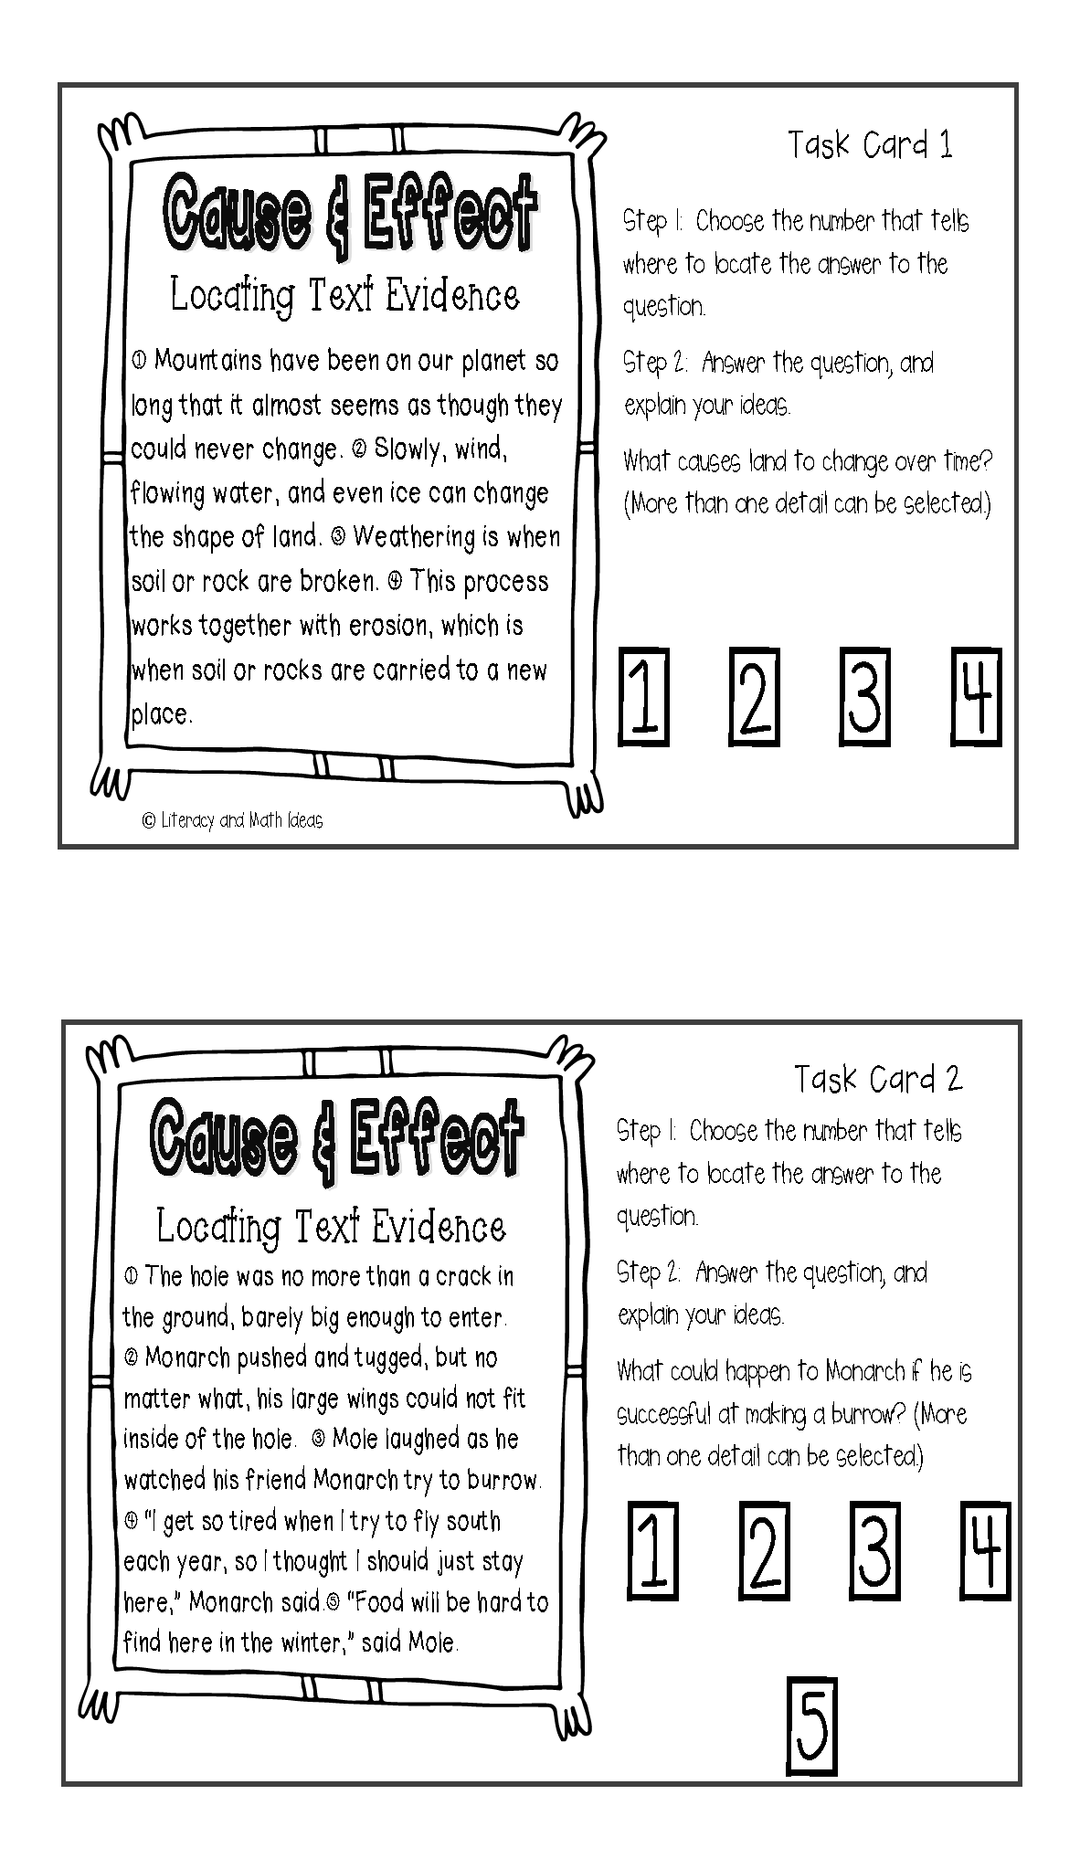 Cause and Effect Task Cards: Locating Text Evidence